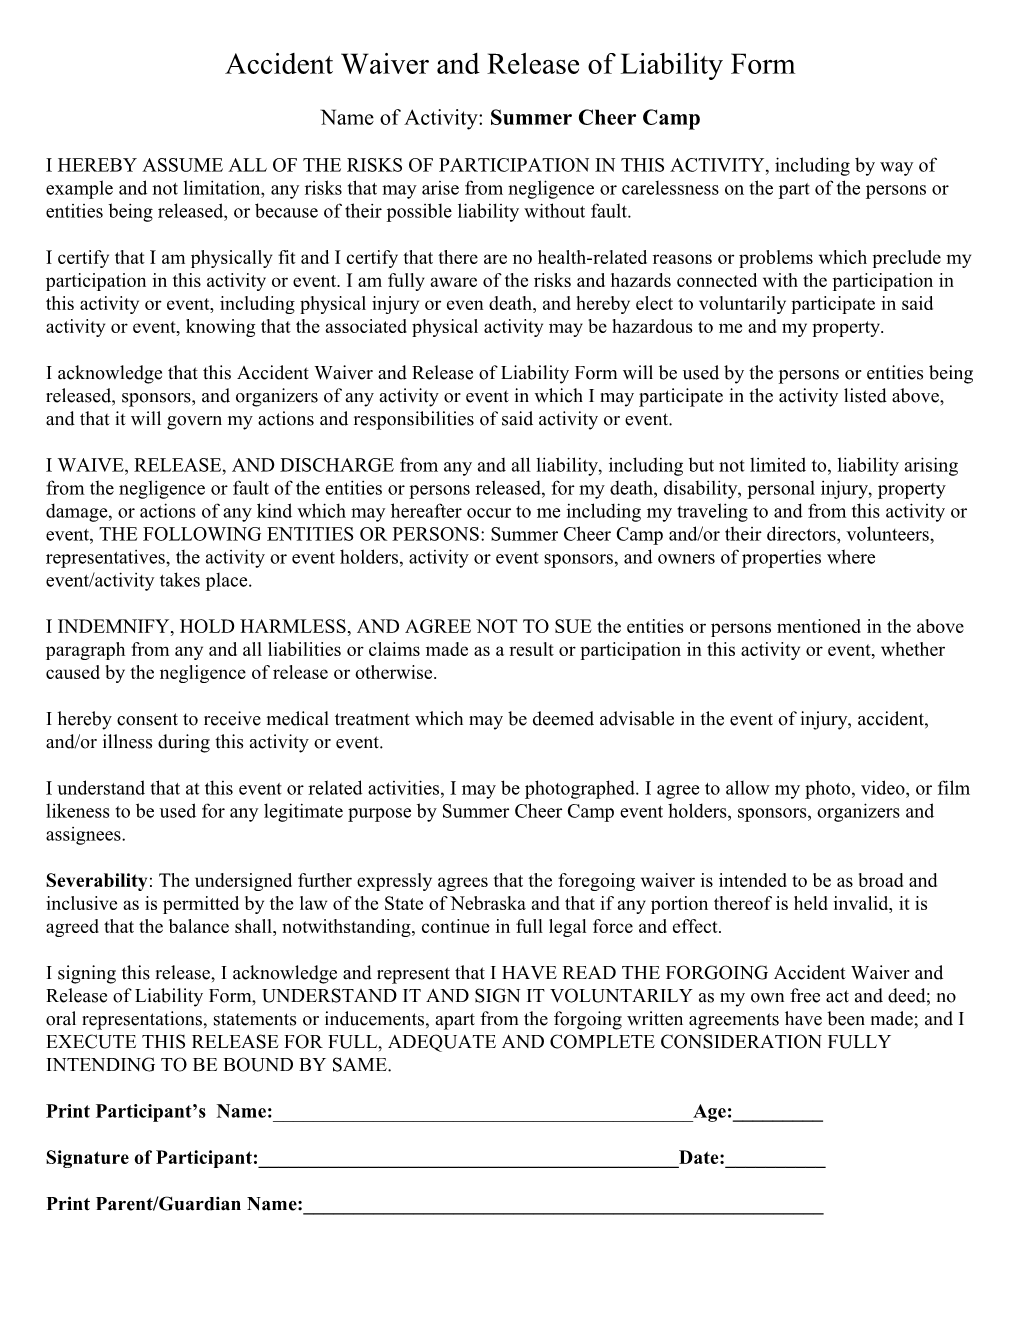 Accident Waiver and Release of Liability Form